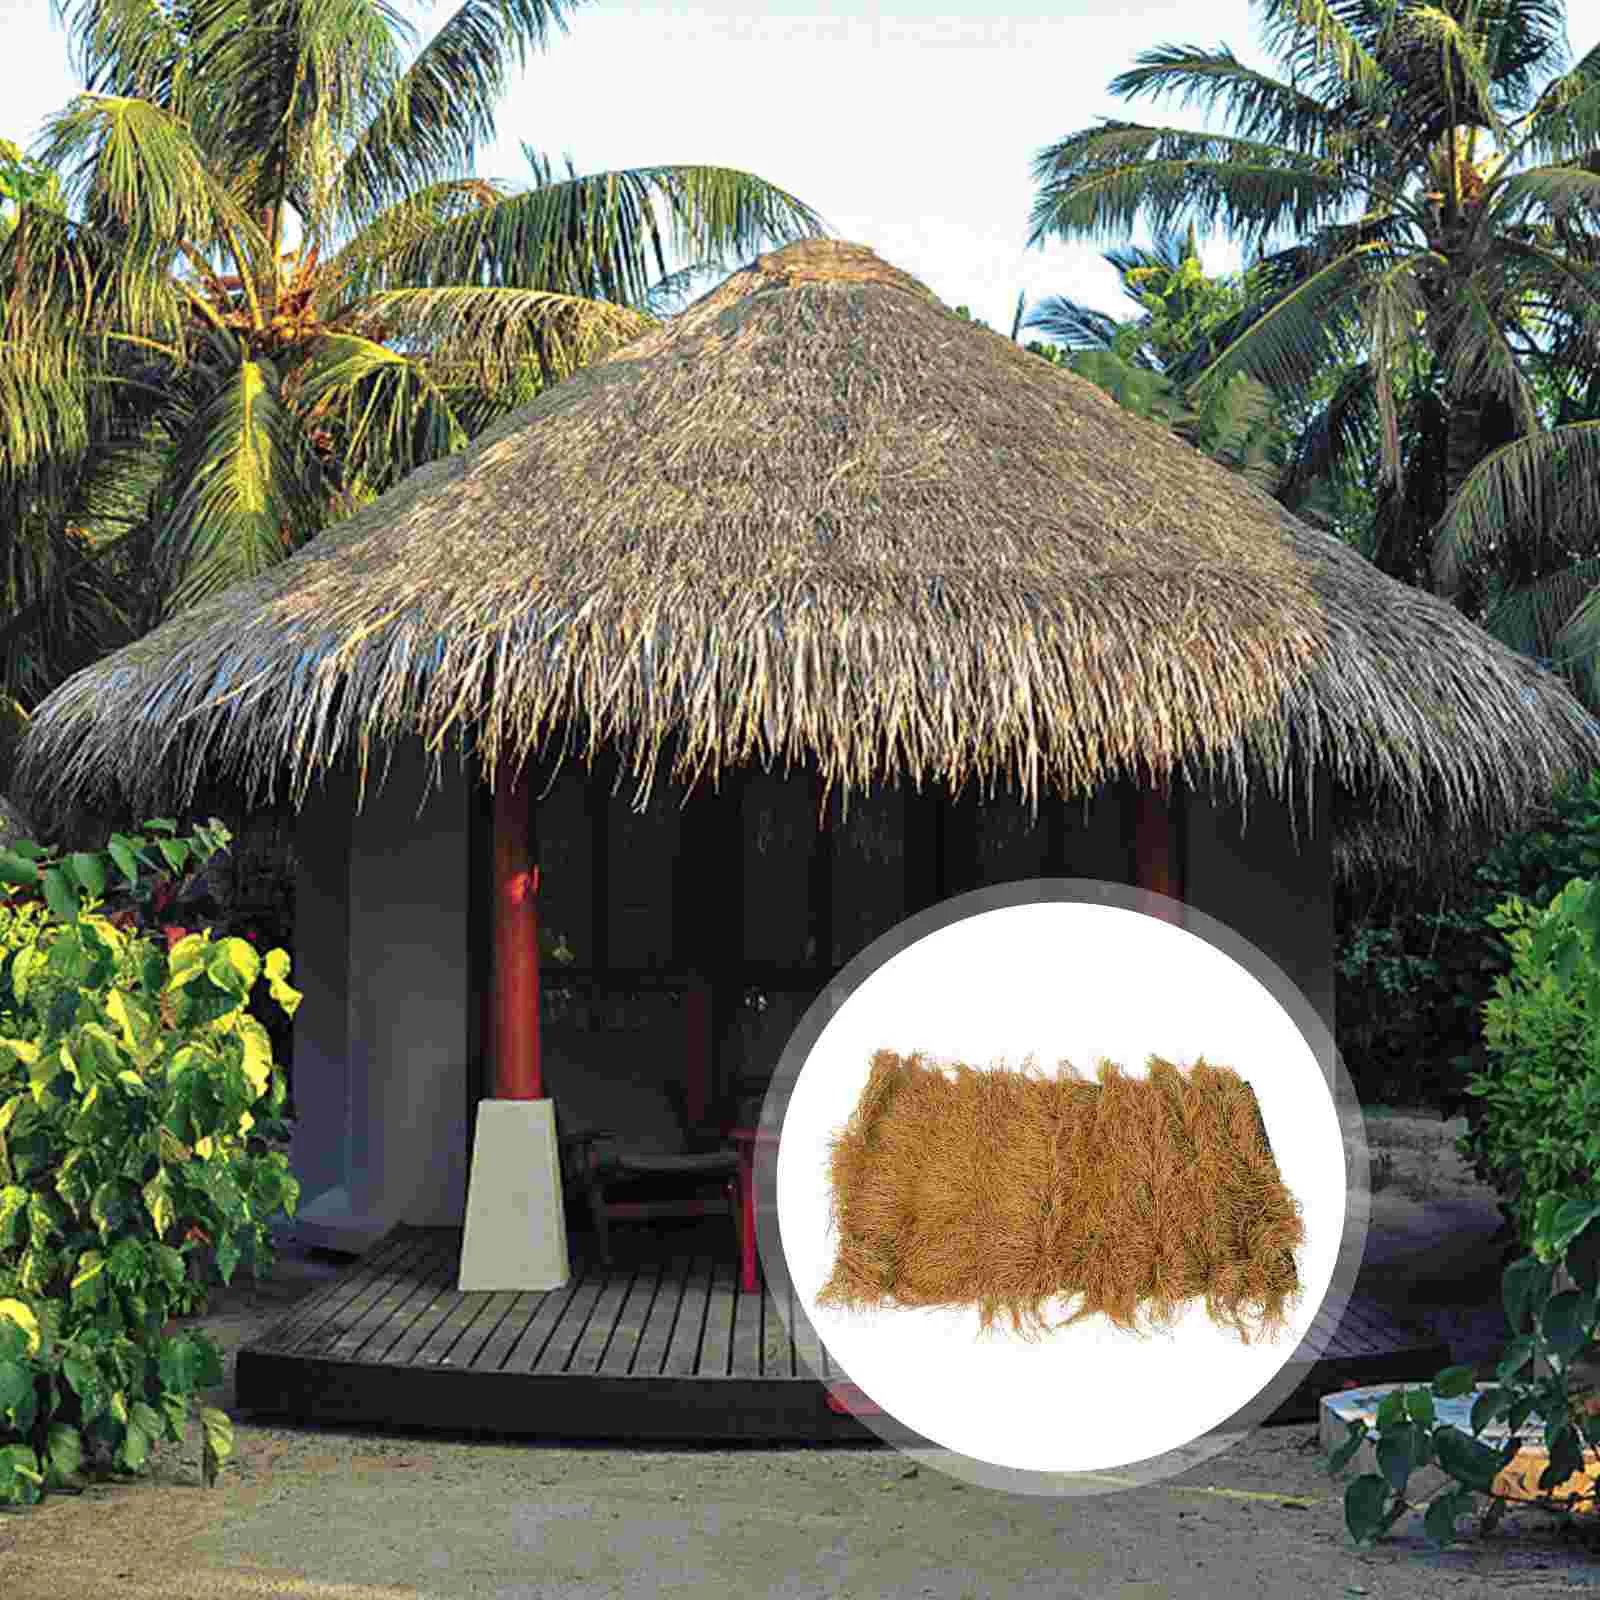 

Mexican Thatch Grass Garden Straw Roof Tiki Bar Artificial Roofing Decorations Hut